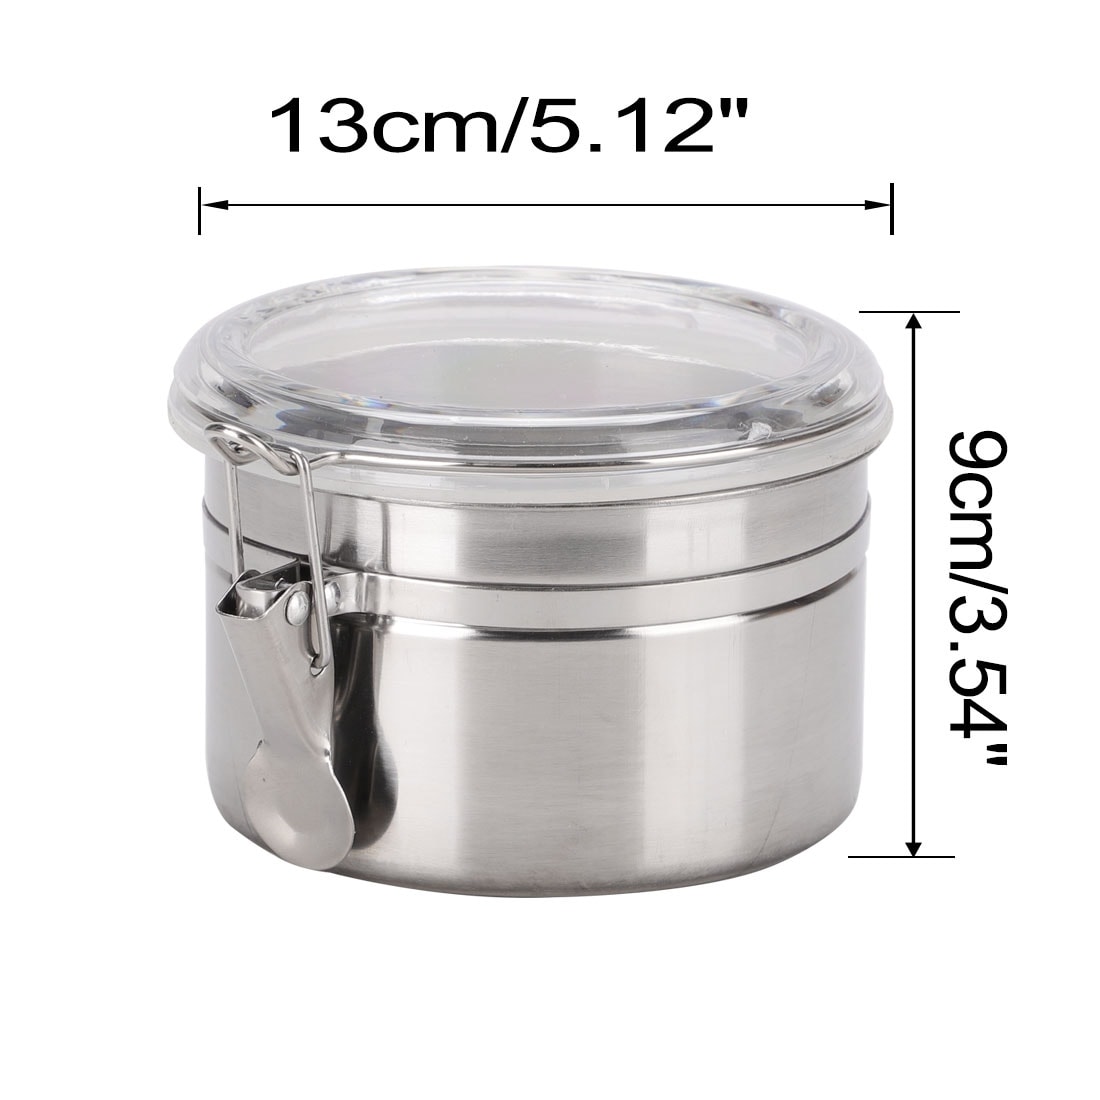 Promo Insulated Food Containers (13.5 Oz.), Household